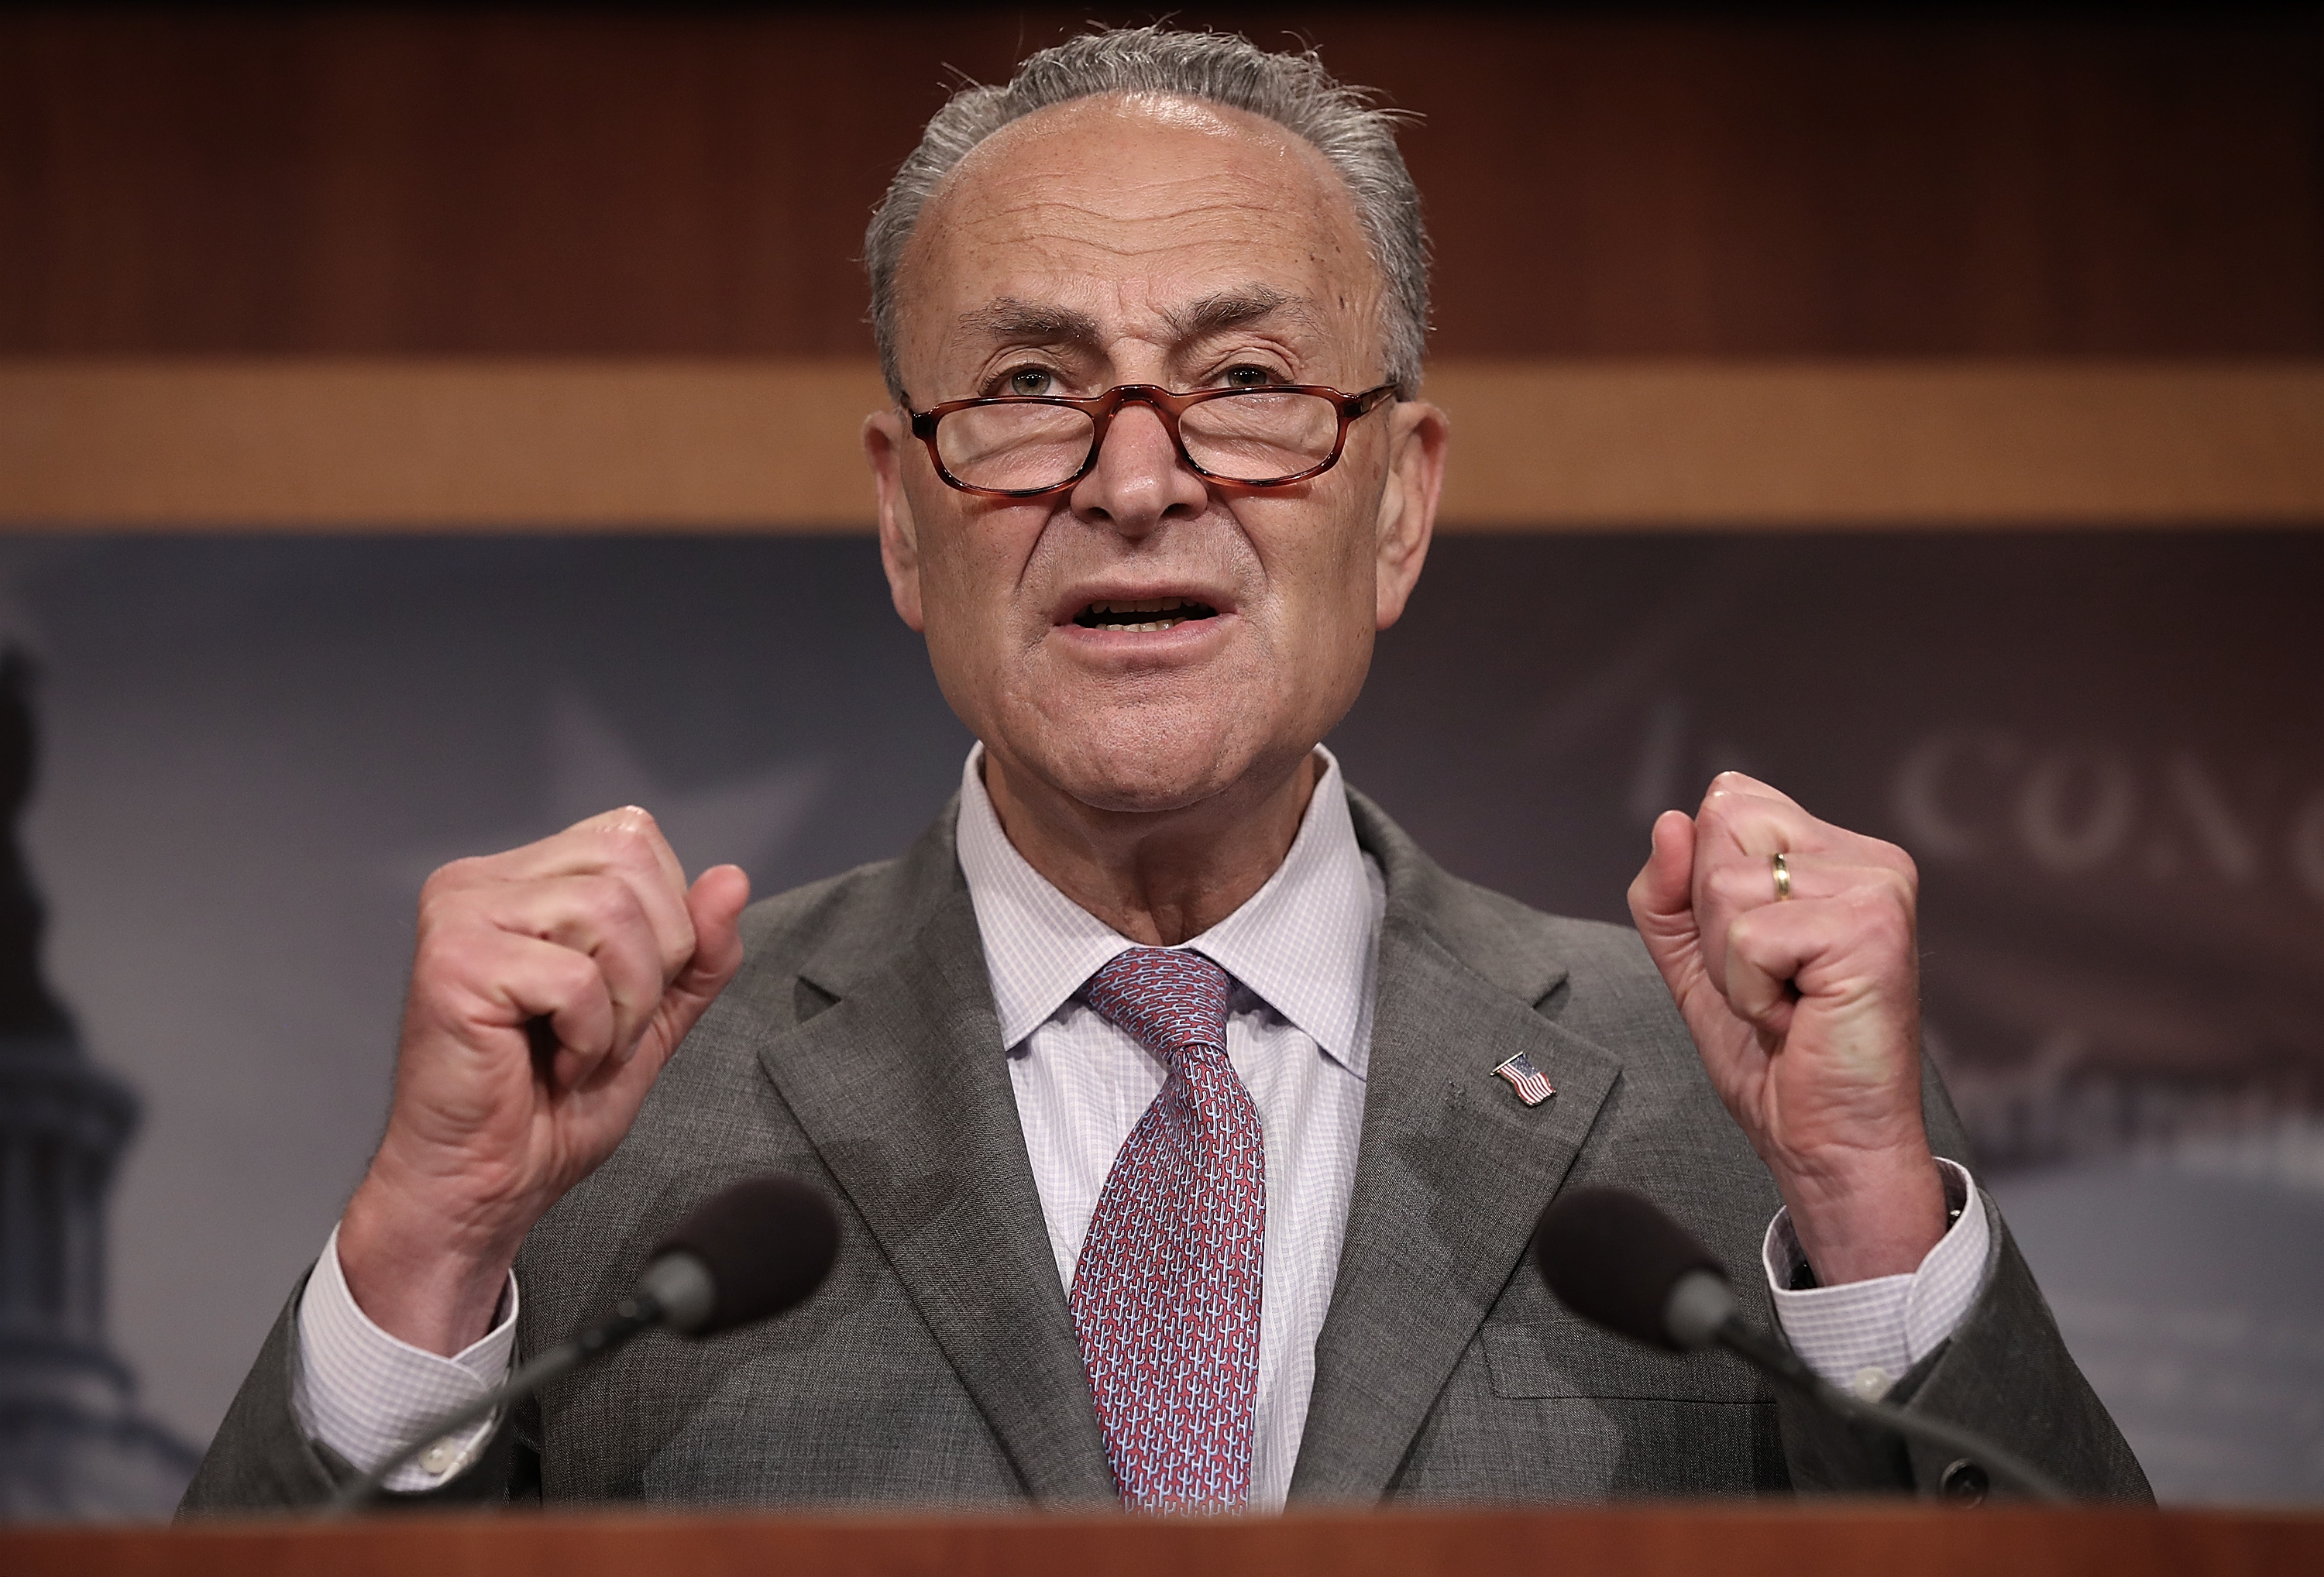 Senate Minority Leader Chuck Schumer (D-NY) speaks during a press conference at the U.S. Capitol July 13, 2017 in Washington, DC. (Win McNamee&mdash;Getty Images)